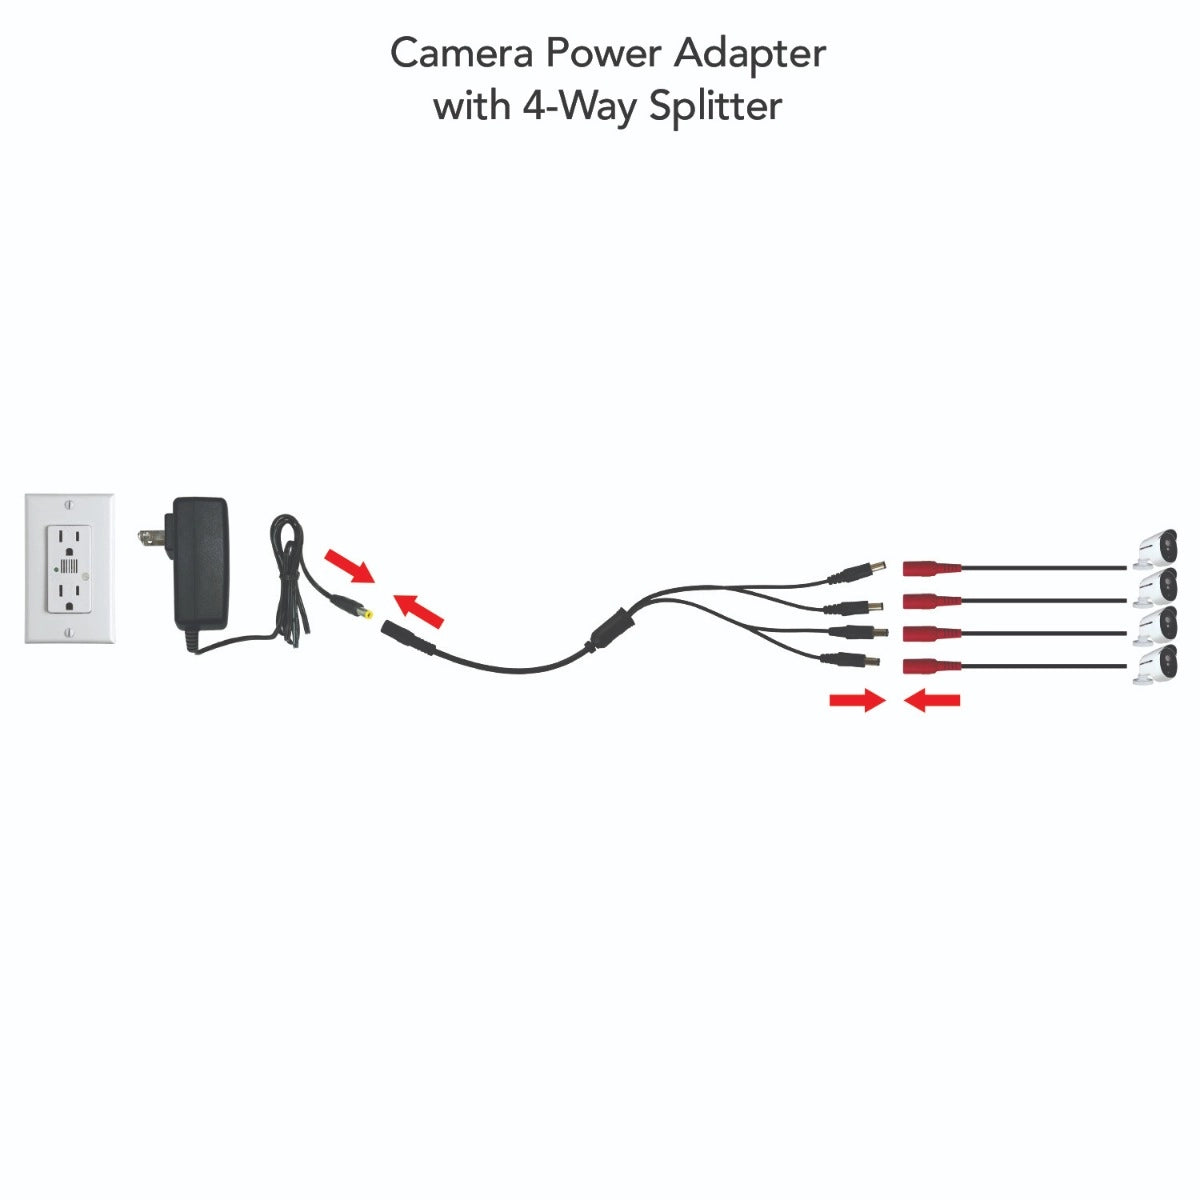 15V-1.6A Camera Power Adapter with 4-Way Power Splitter - Powers up to 4 Cameras